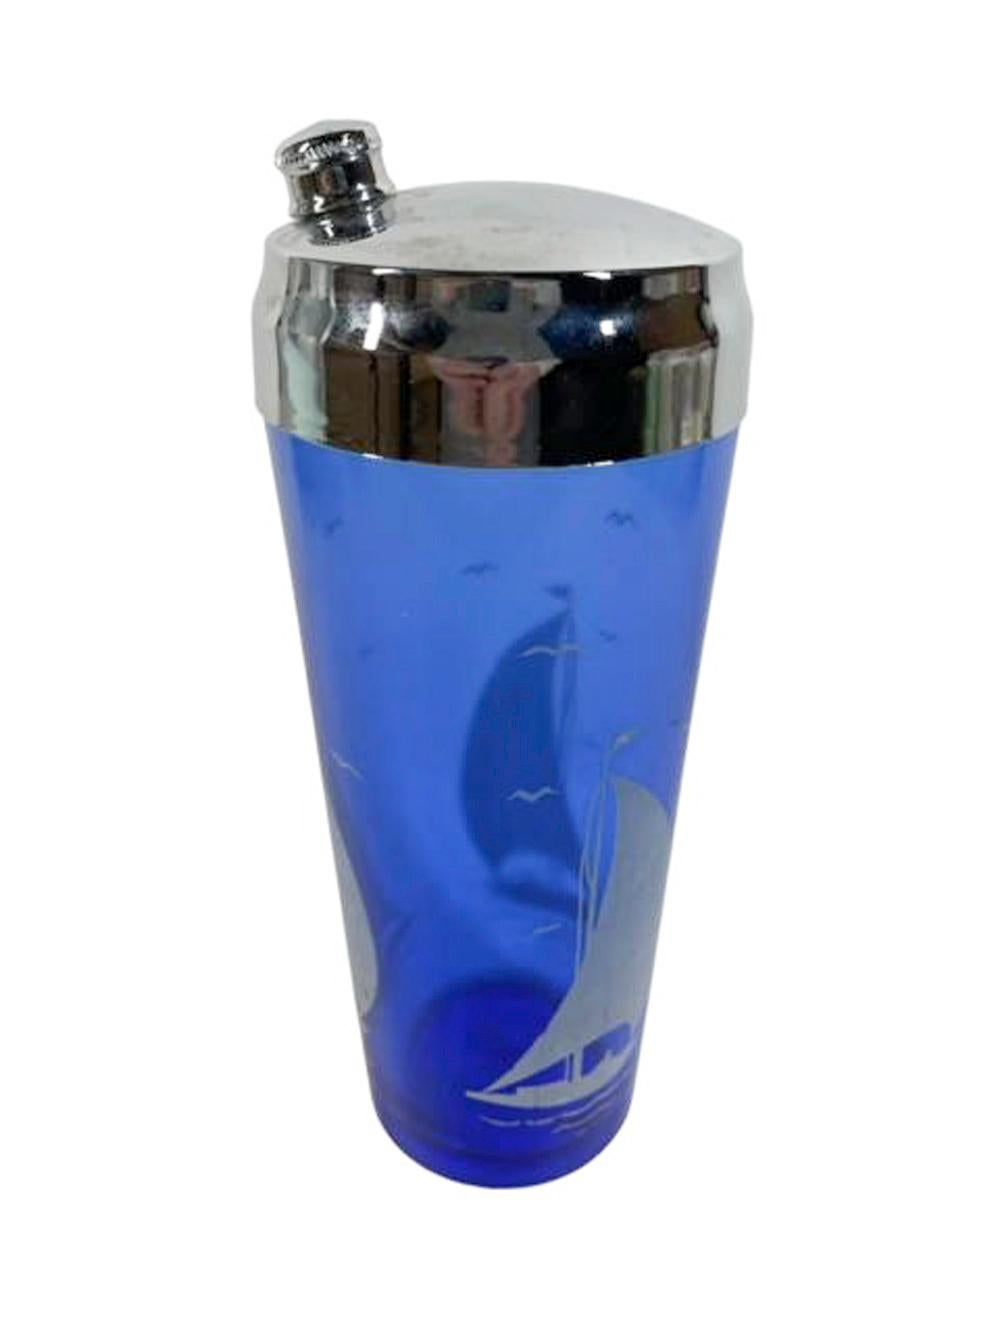 Art Deco Hazel-Atlas Cobalt Cocktail Shaker and 6 Glasses with White Sailboats and Birds For Sale